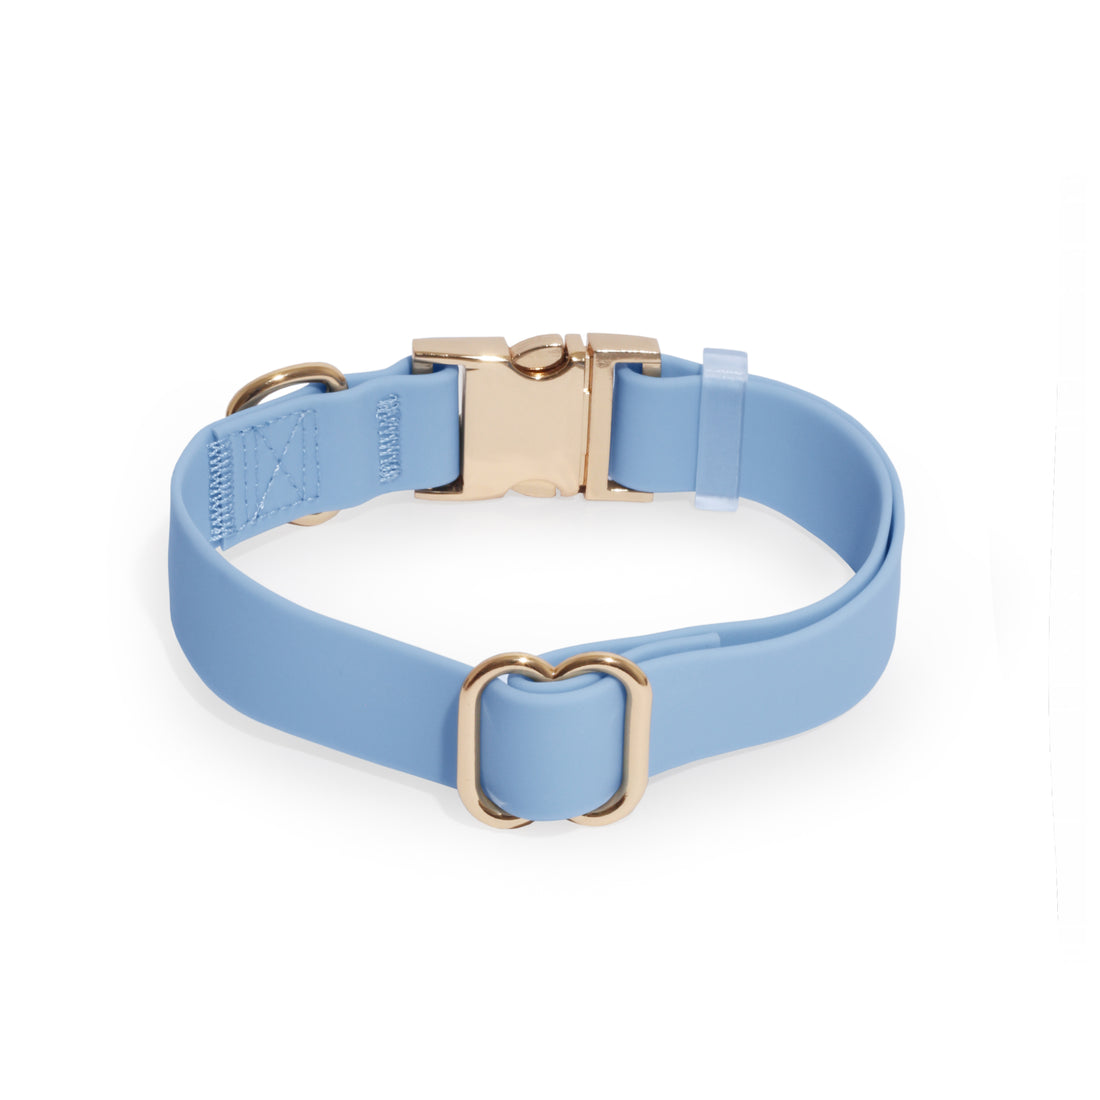 Light Blue Waterproof Dog Collar | Malibu Blue Quick Release Collar | Available in 3 Sizes | Durable Dog Collars | Shop Sunny Tails